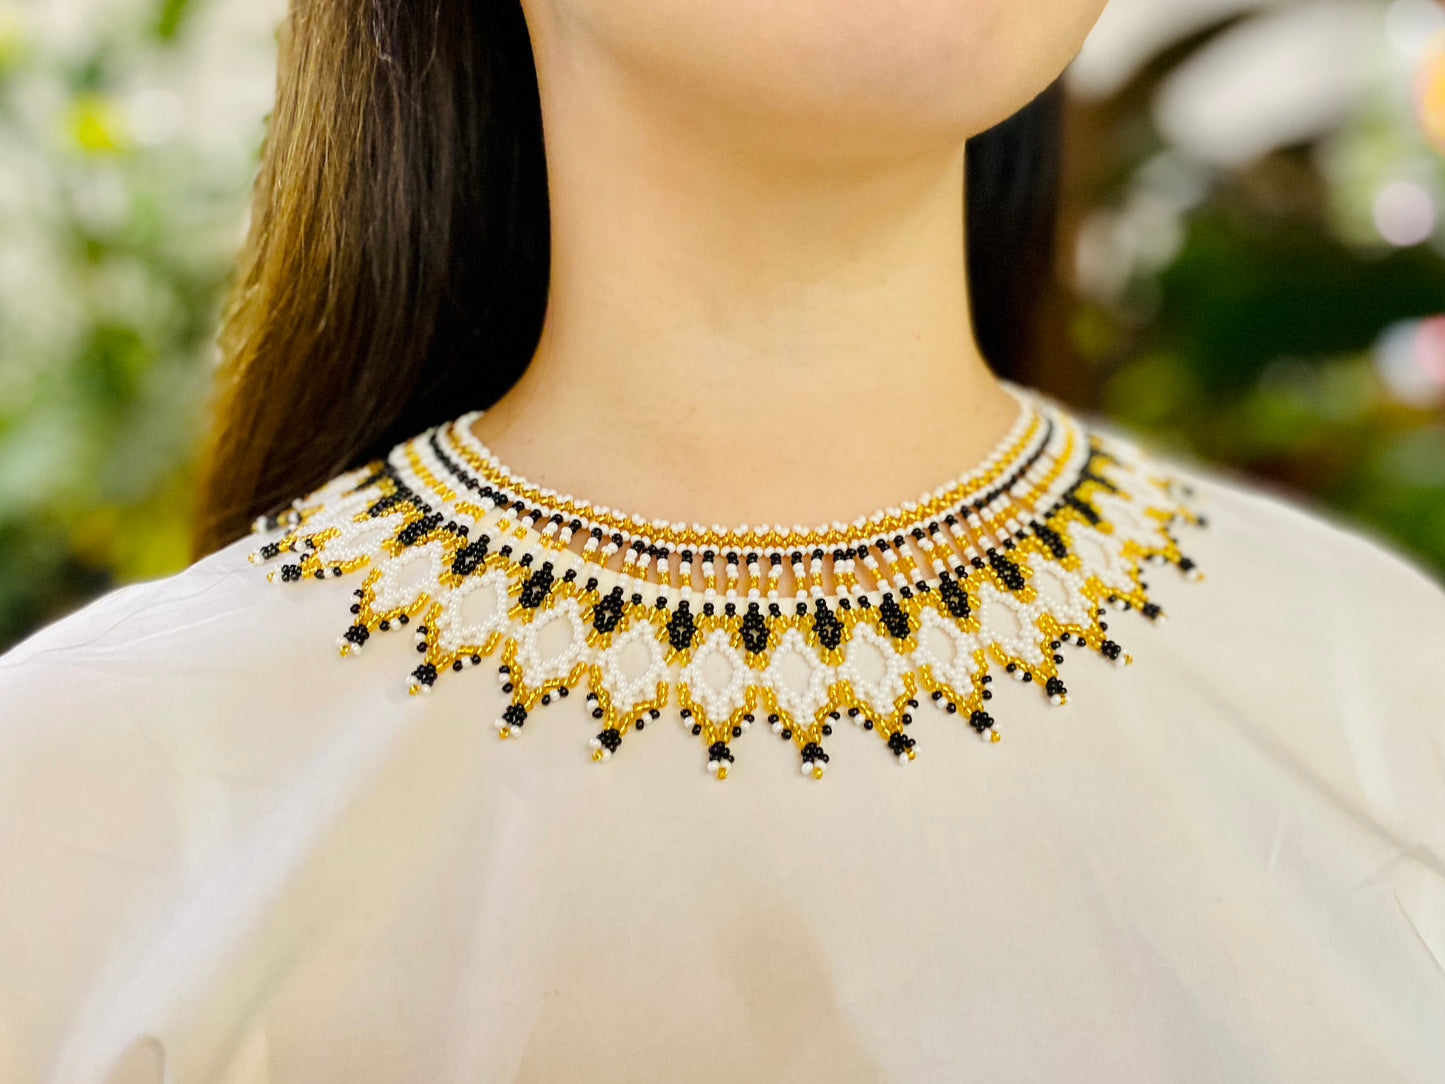 Enlace Beads Collar Necklace / Christy